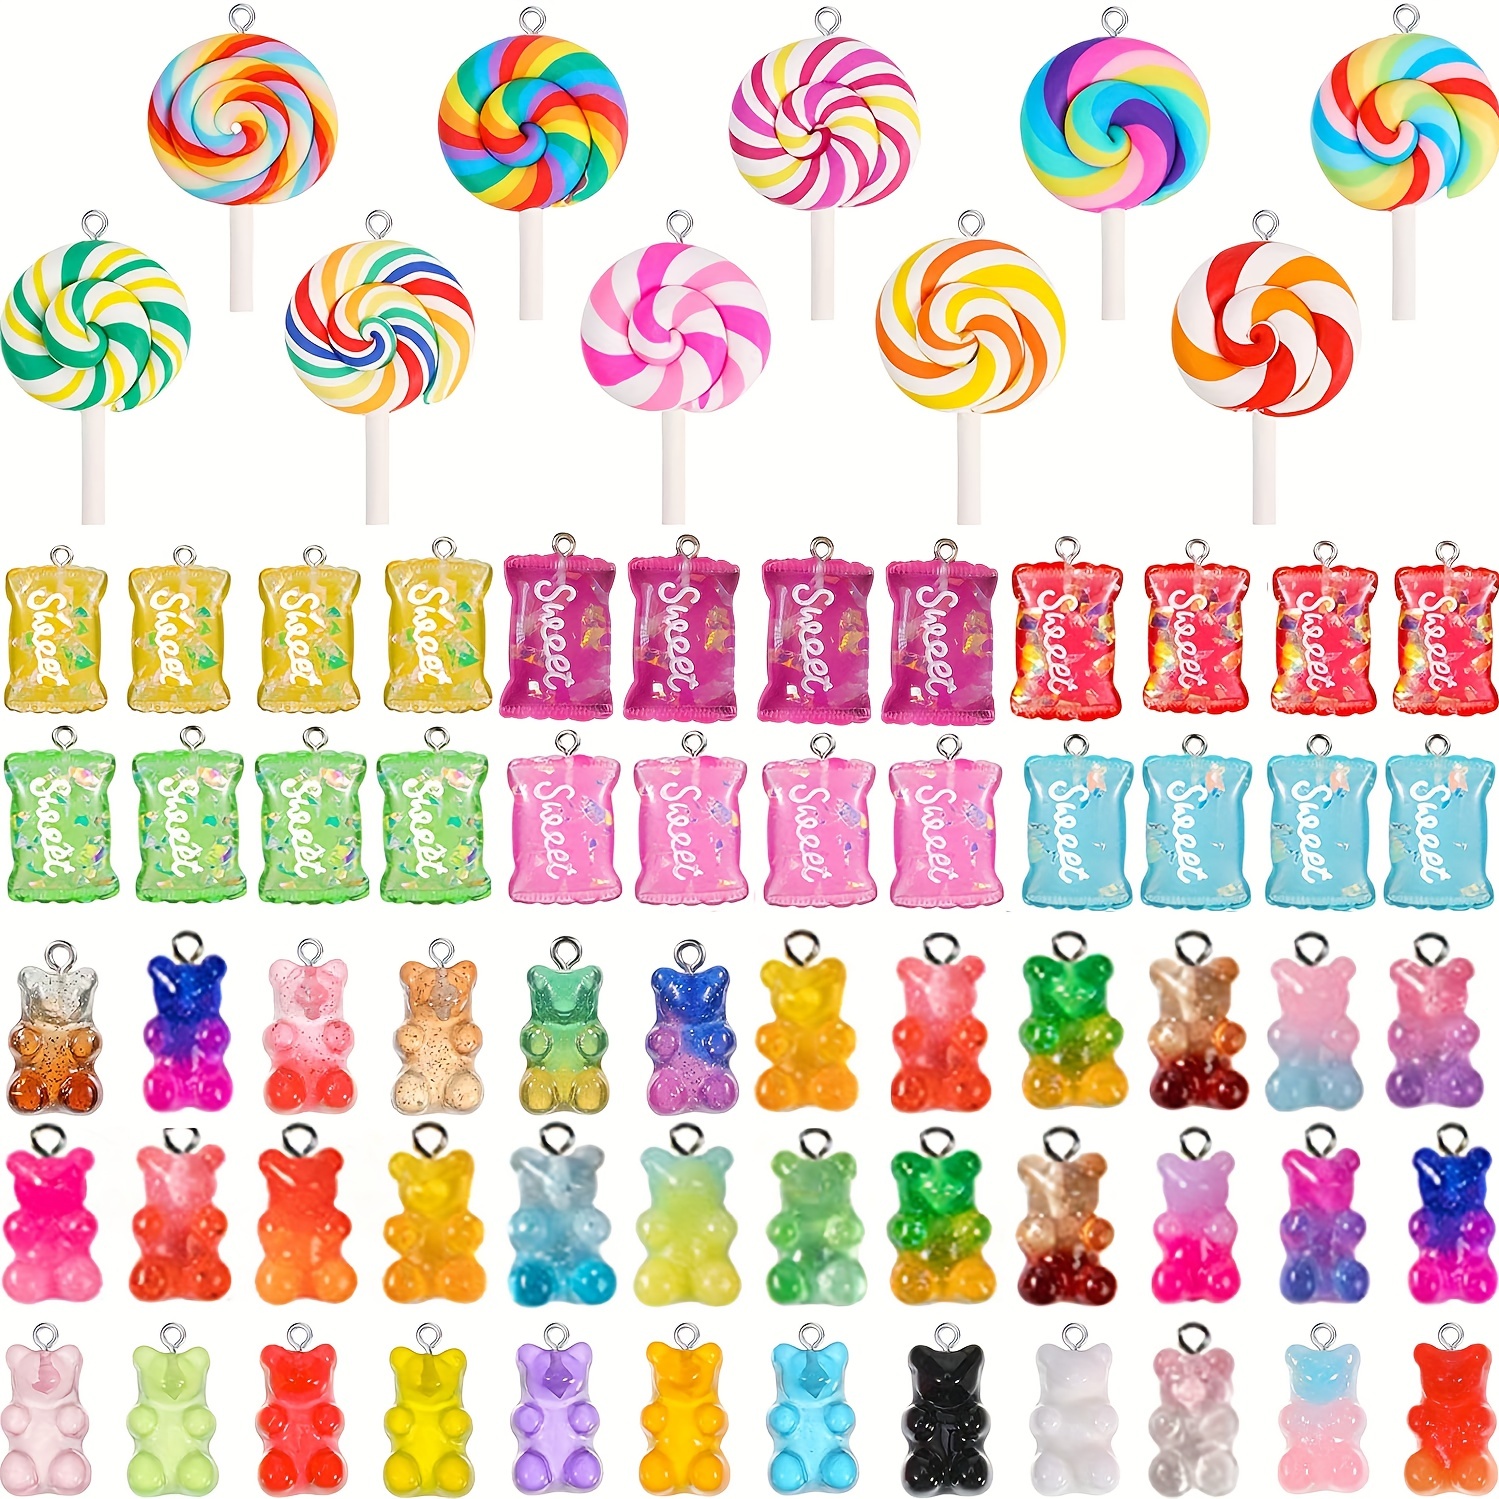 40Pcs Creepy Valentine Charms Acrylic Pastel Goth Coffin Gumball Machine  Pendant Jewlery Findings For Earring Necklace